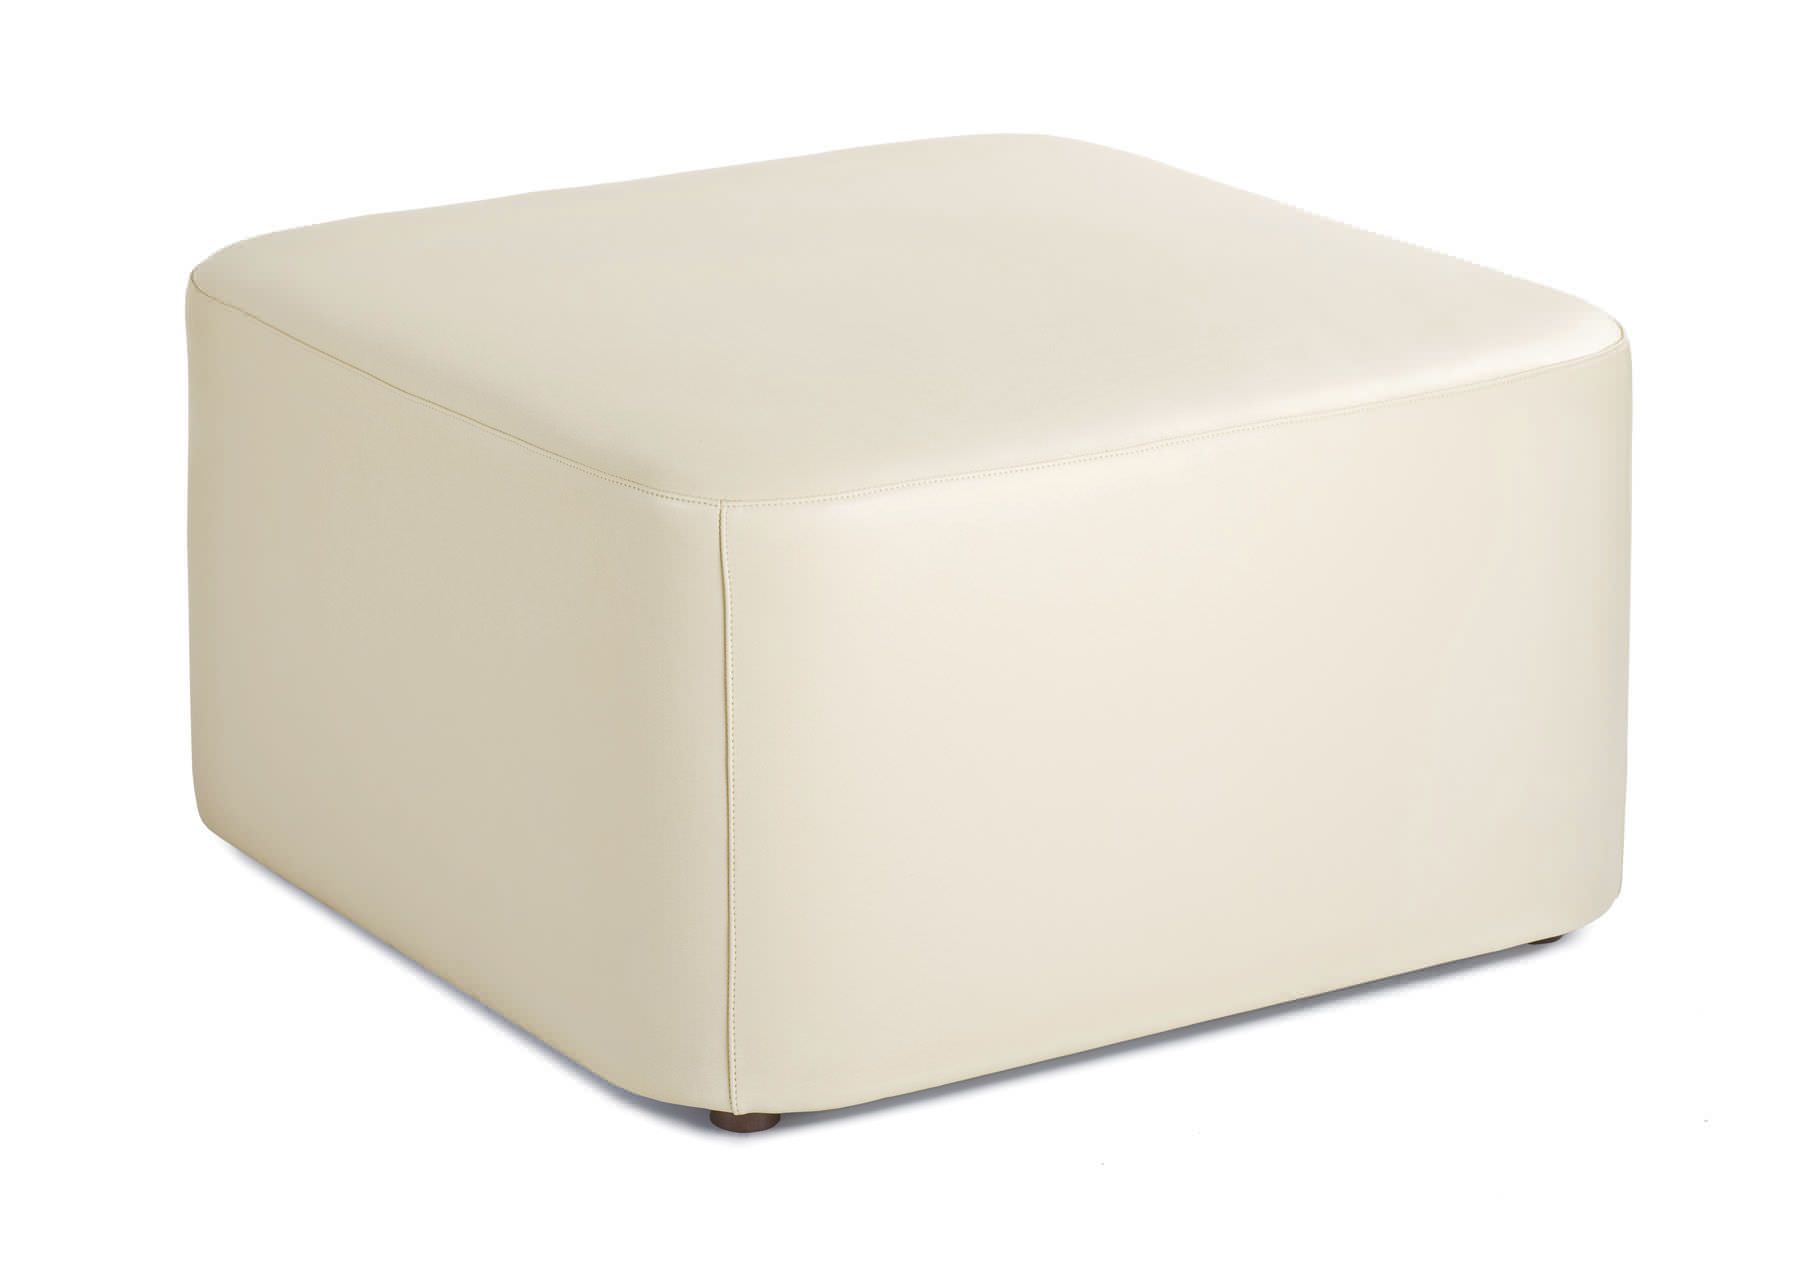 Footstool for healthcare facilities Resolve Cabot Wrenn Care